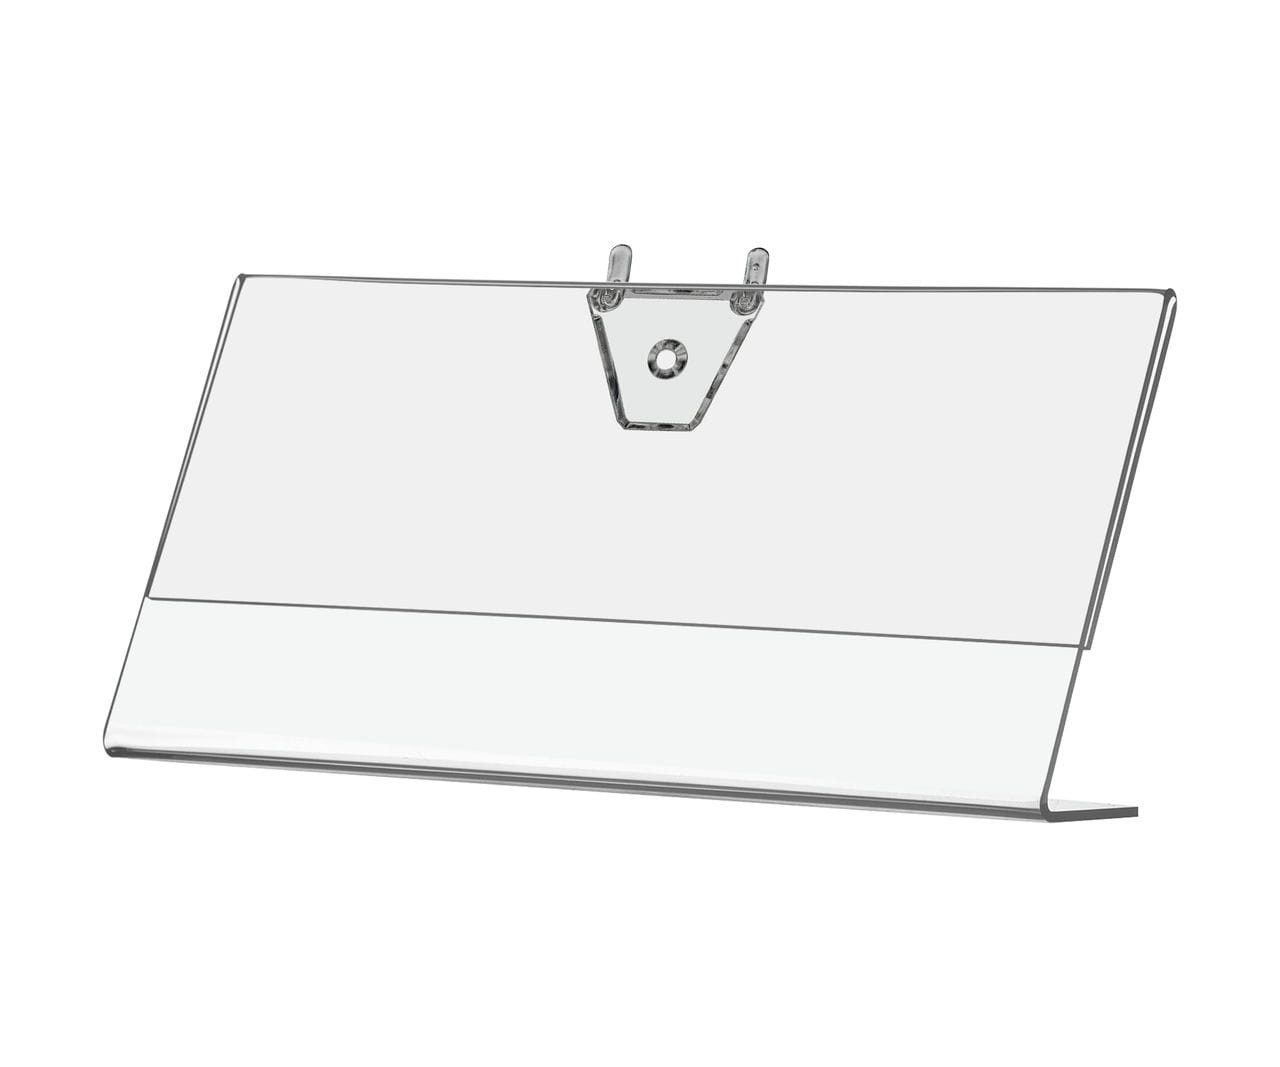 3.5”W x 5H Small Sign Holder Side Load Slant Back Clear Display